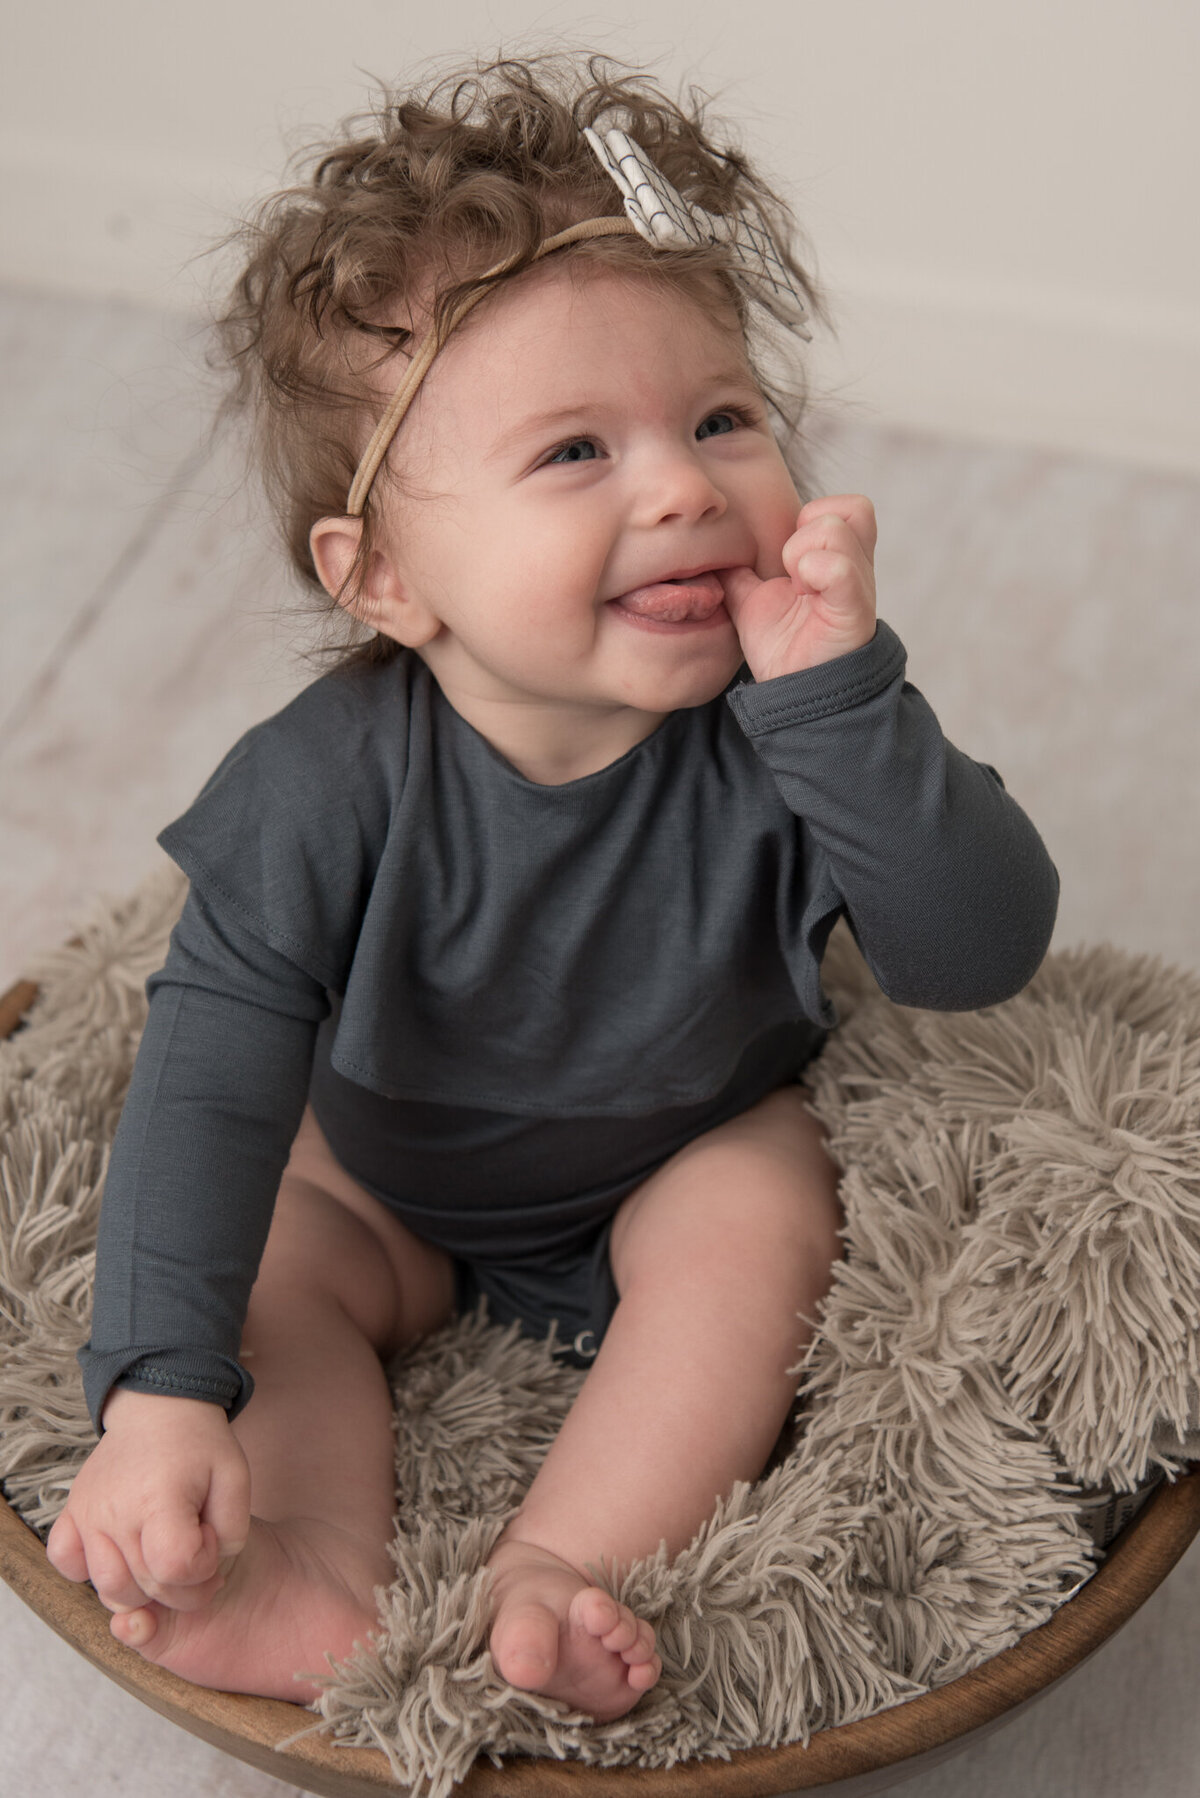 Infant girl sitting in bowl, holding toes and smiling off-camera